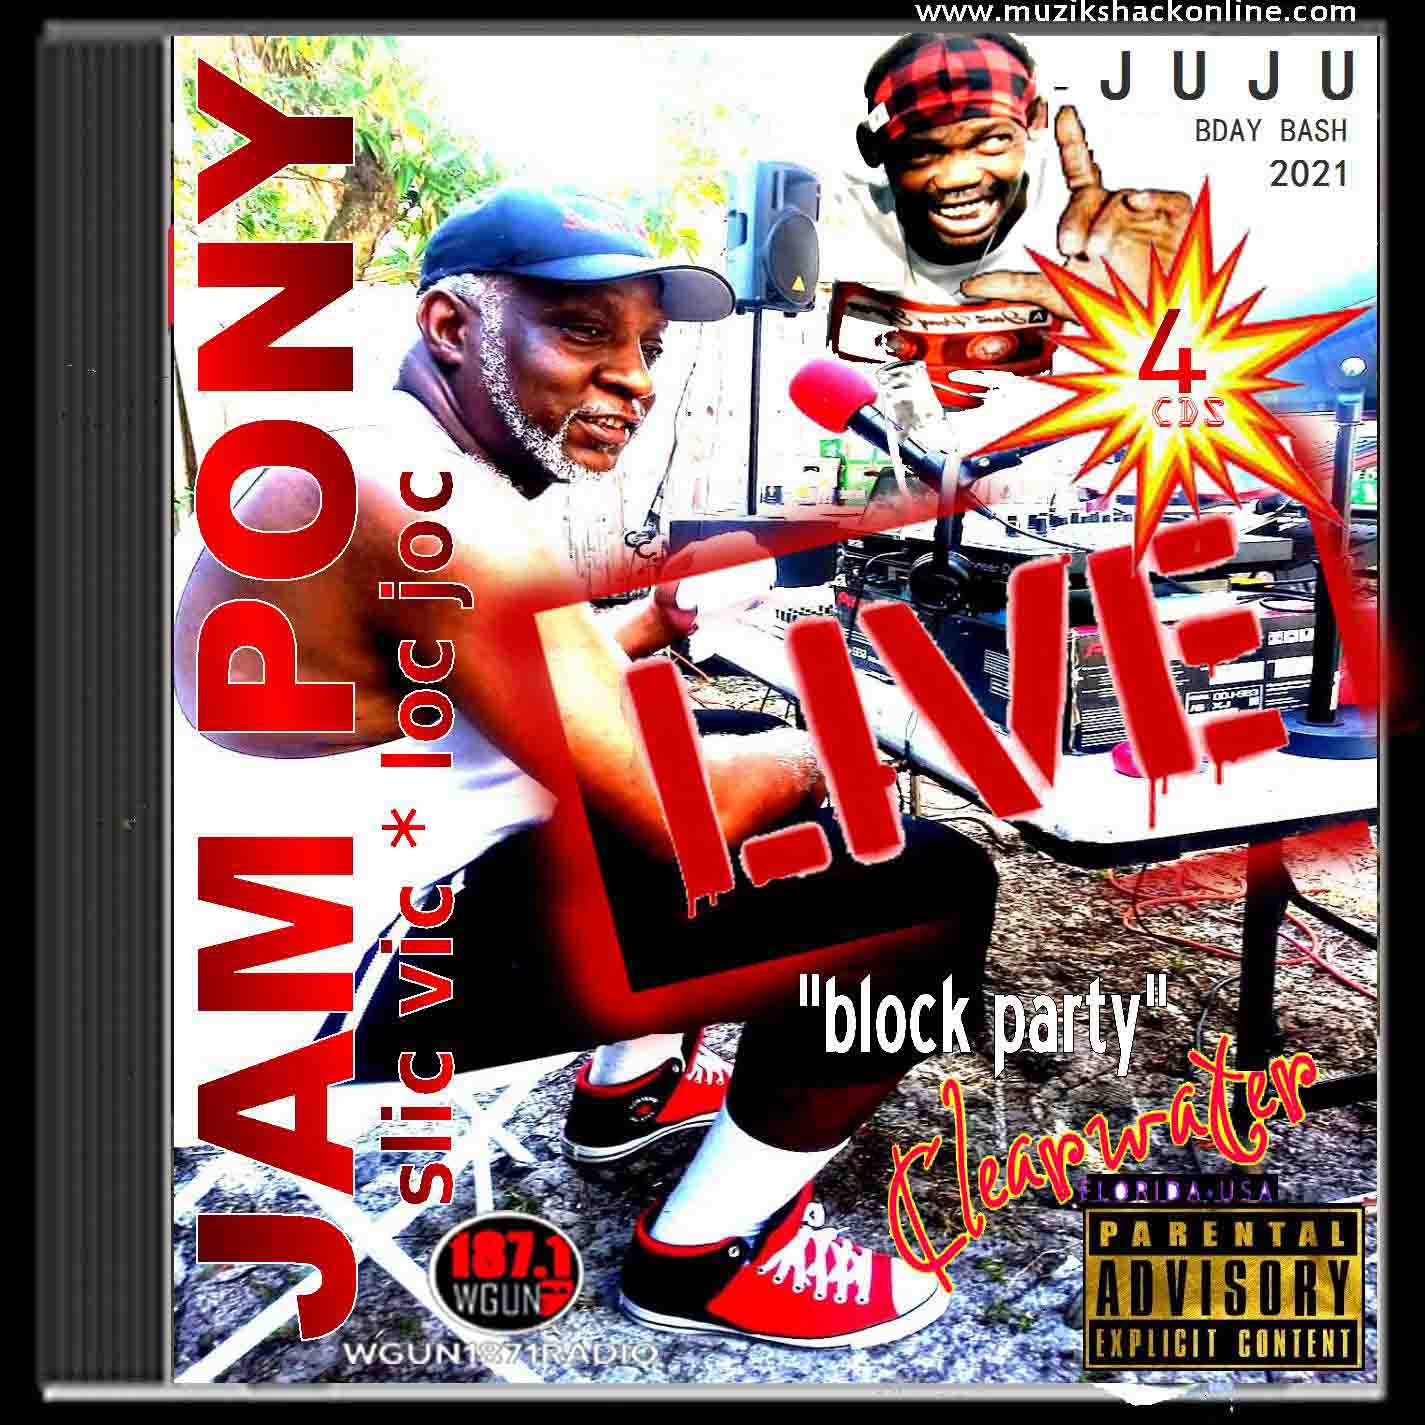 JAM PONY - LIVE" IN CLEARWATER JUJU GDAY BASH (BLOCK PARTY COPY) c2022